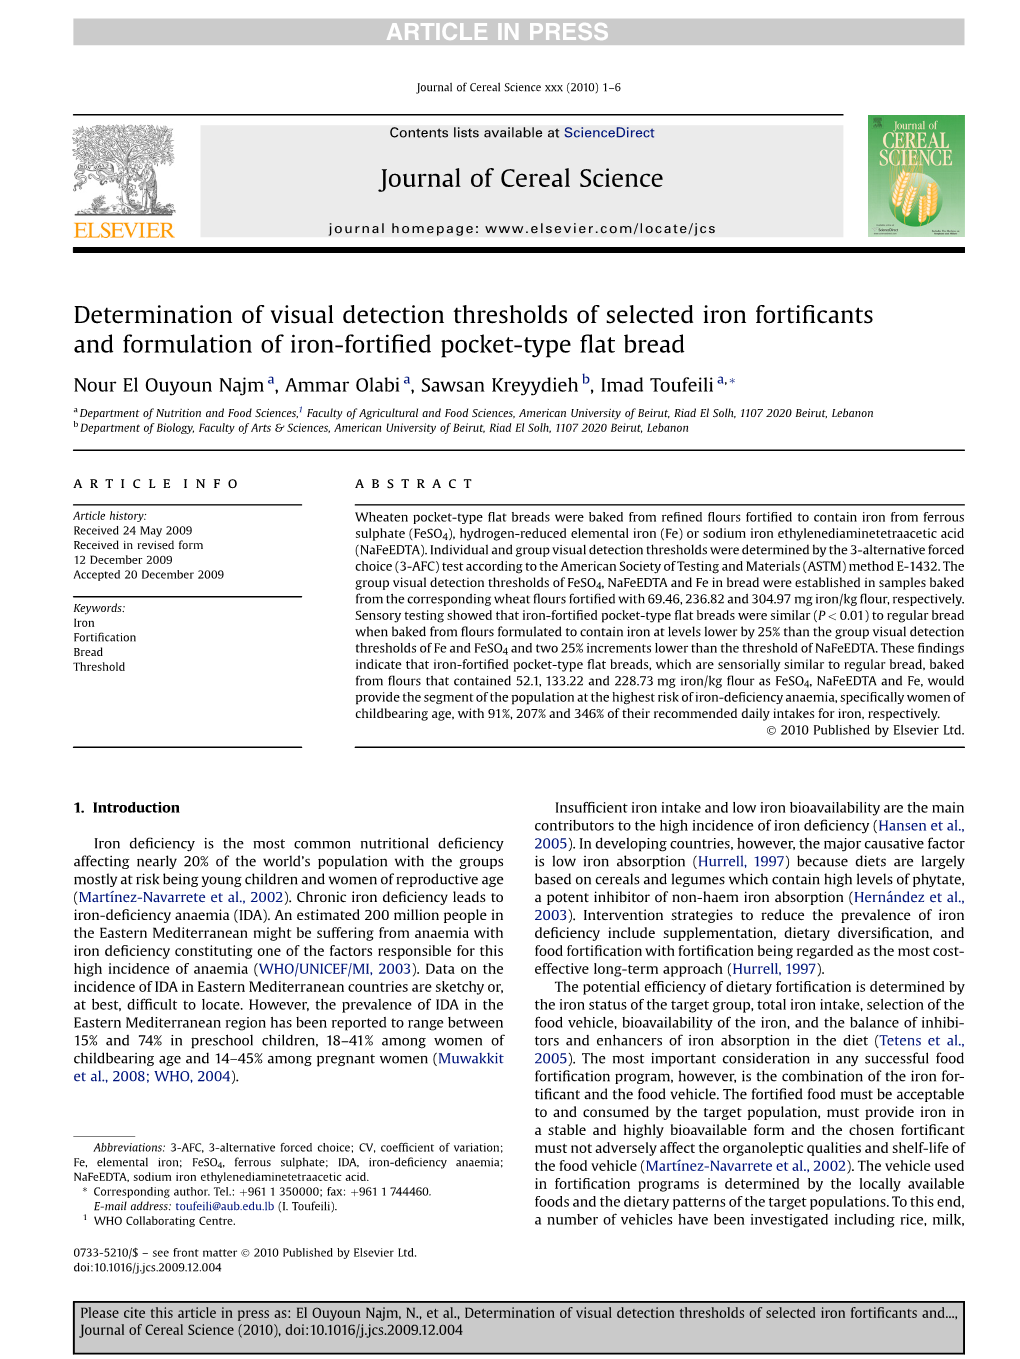 Determination of Visual Detection Thresholds of Selected Iron Fortificants and Formulation of Iron-Fortified Pocket-Type Flat Br